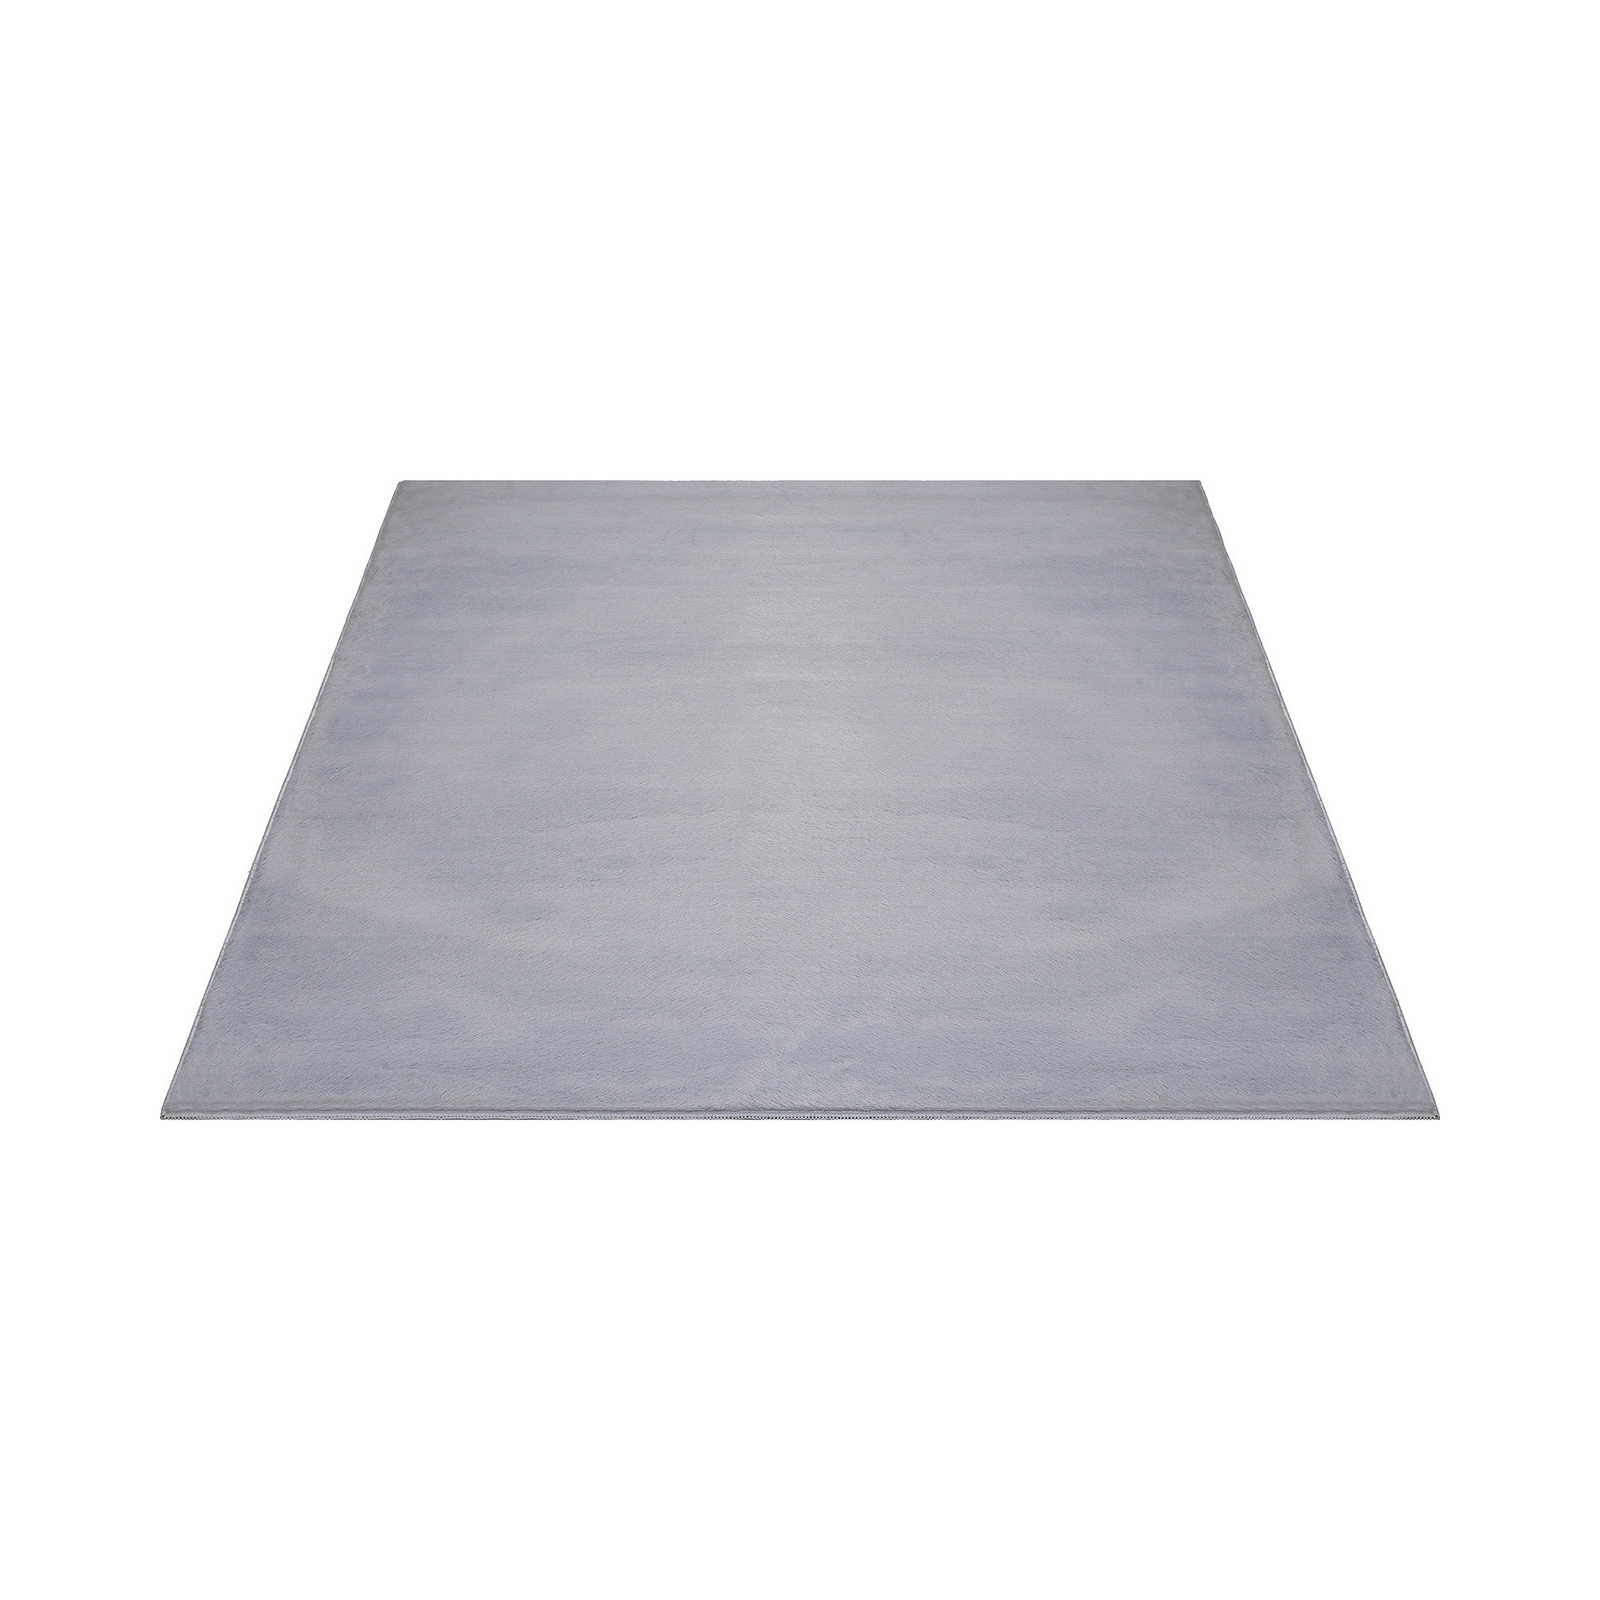 Comfortable high pile carpet in soft grey - 280 x 200 cm
